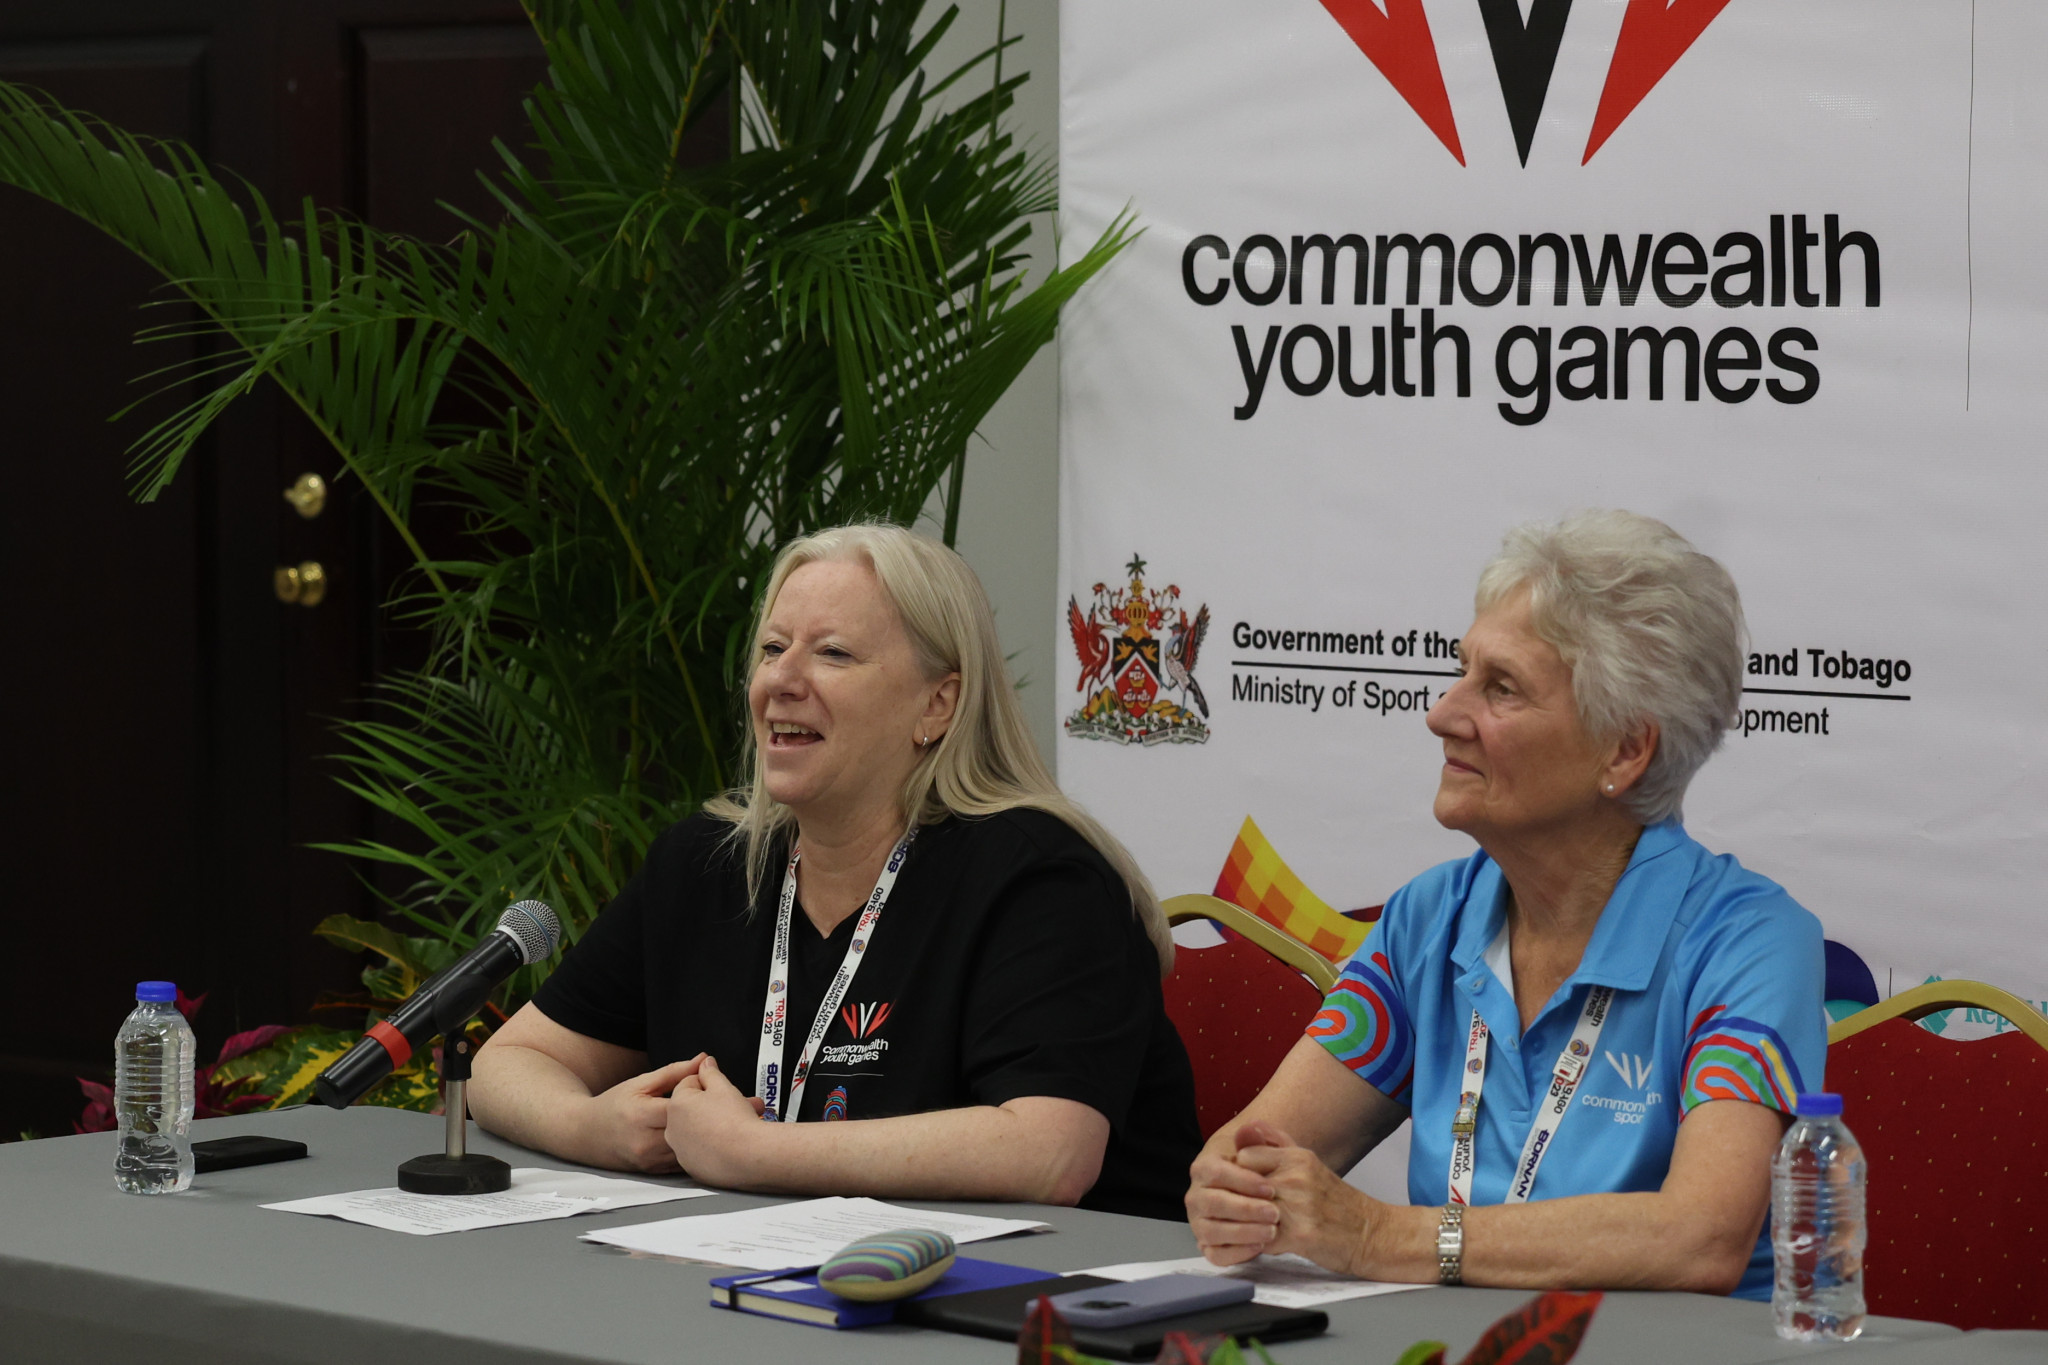 CGF President Dame Louise Martin, right, said the 2026 Commonwealth Games had been discussed as "fully as we could" but wants the focus to be on Trinbago 2023 ©Getty Images